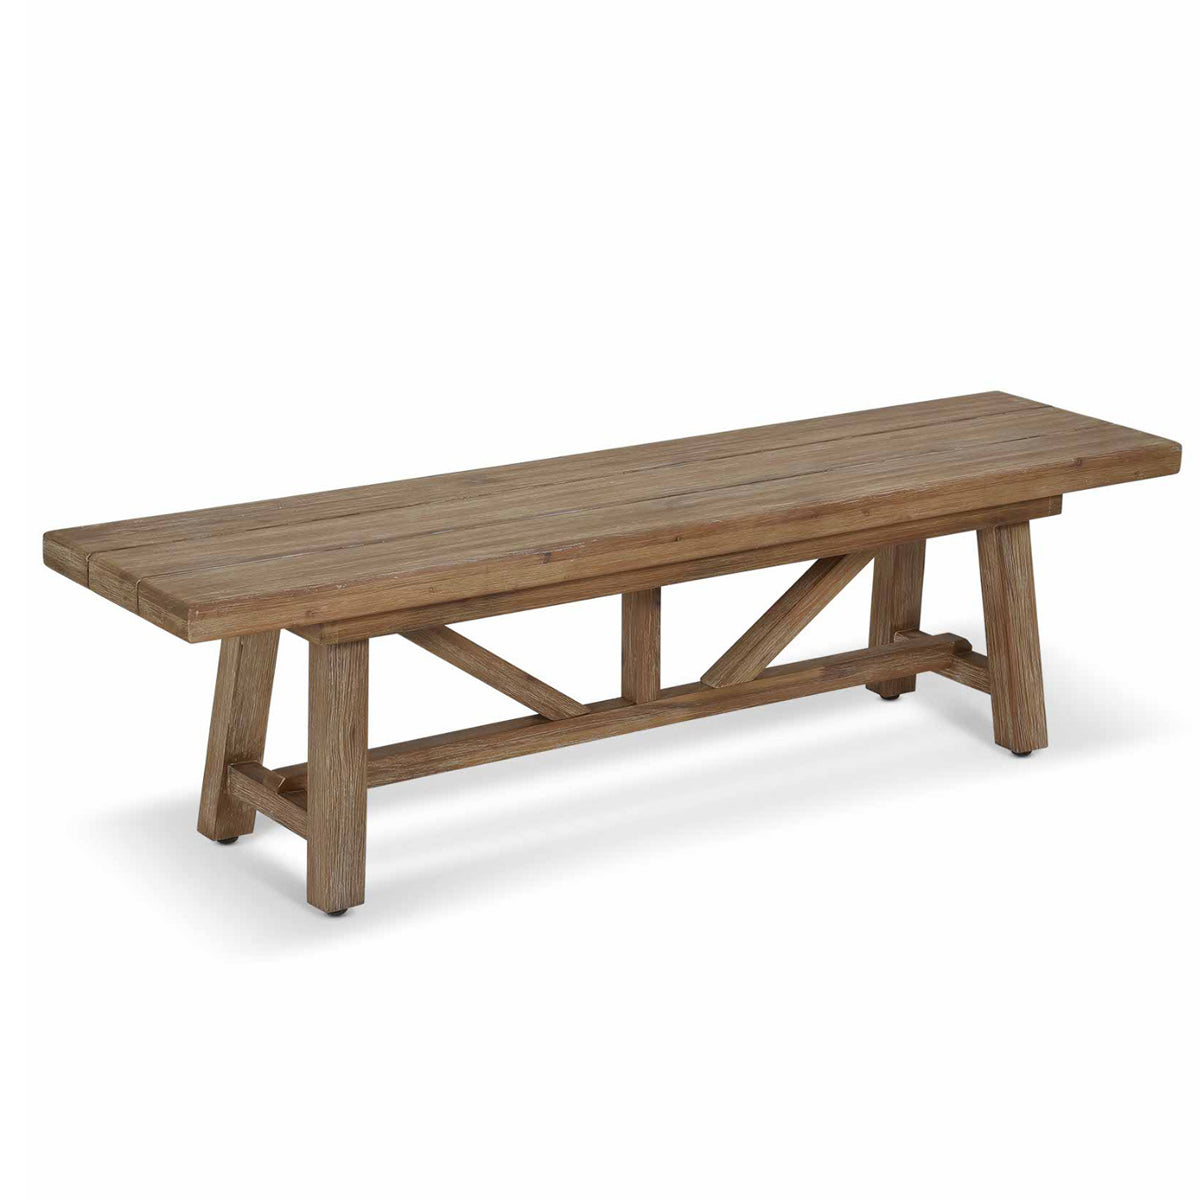 Chilford Wooden Bench Two Sizes